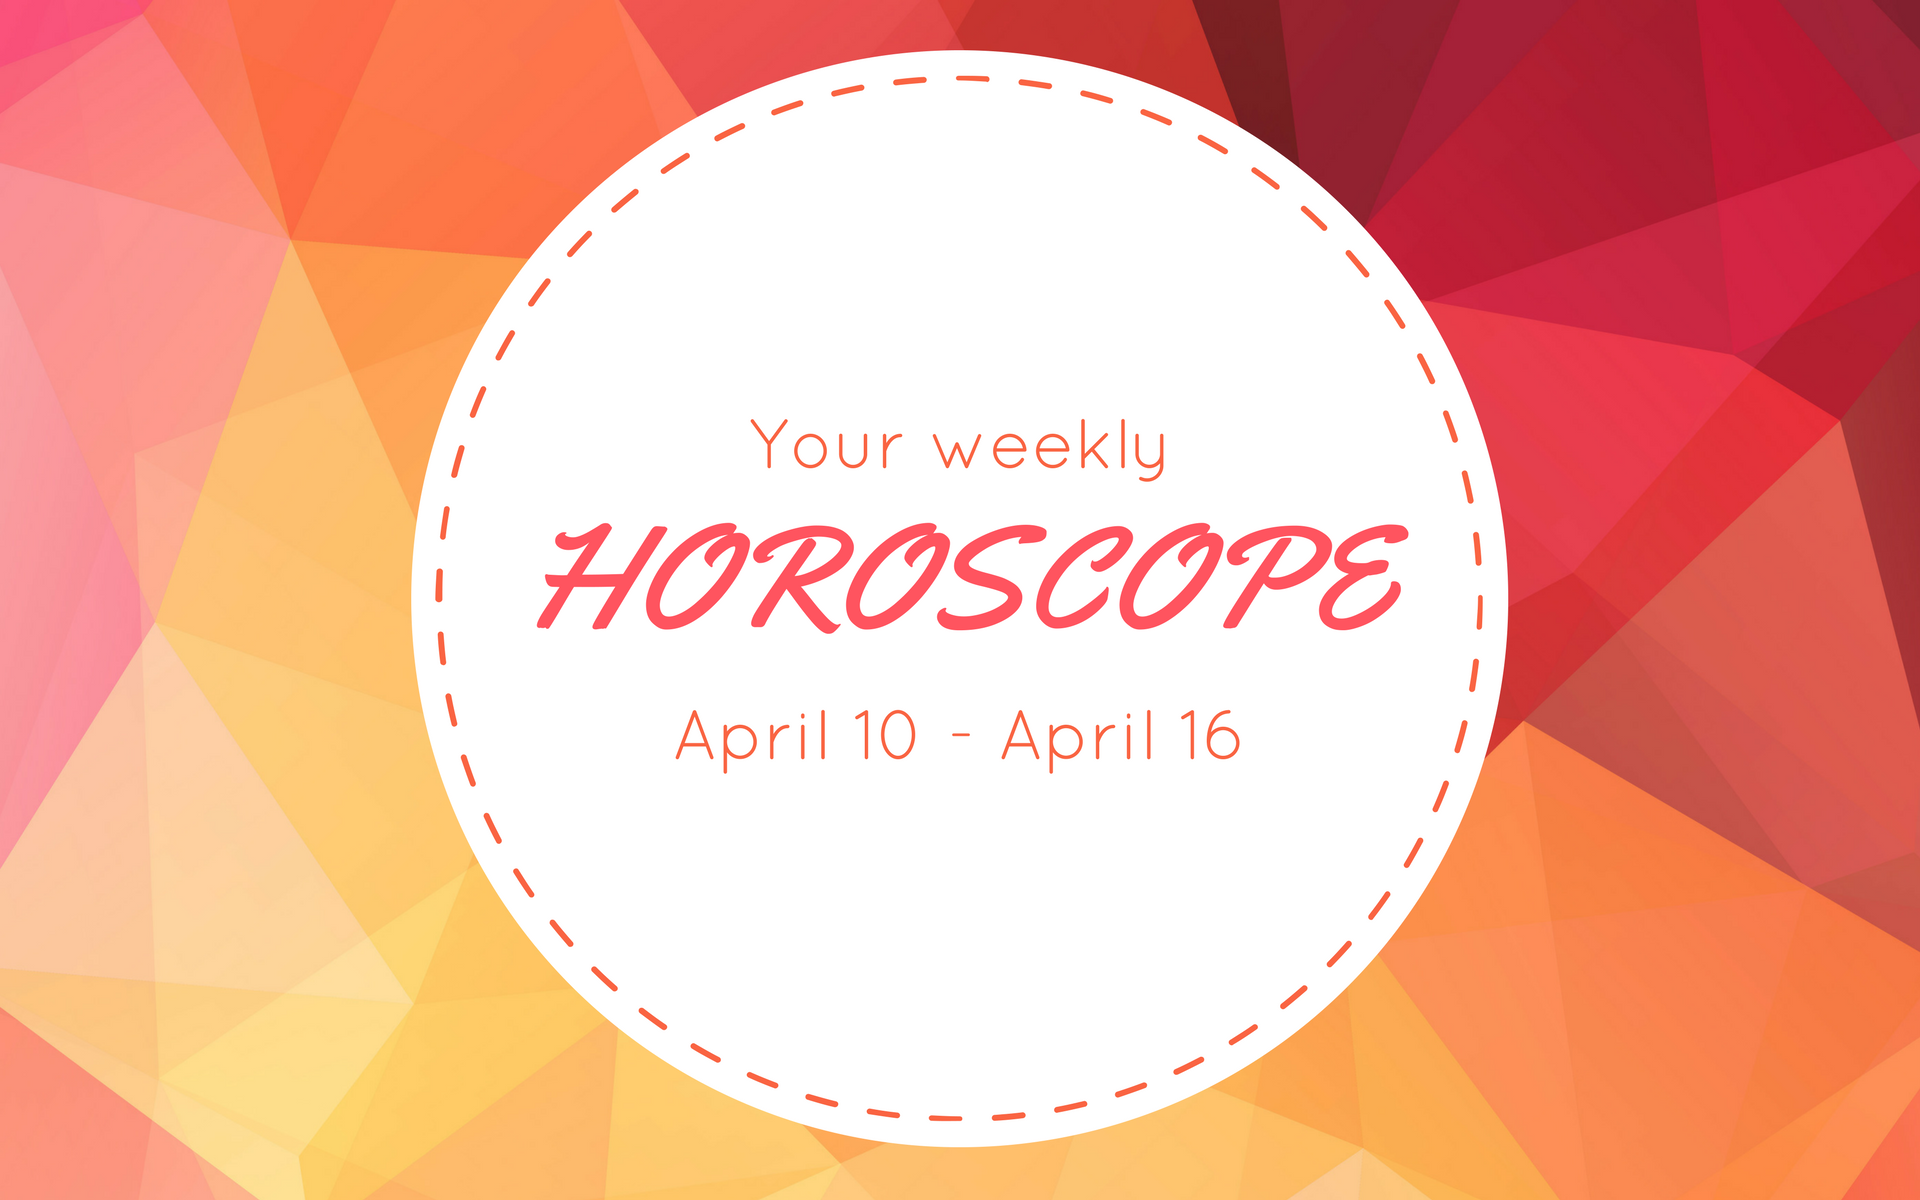 Your Weekly Horoscope: April 10 - April 16